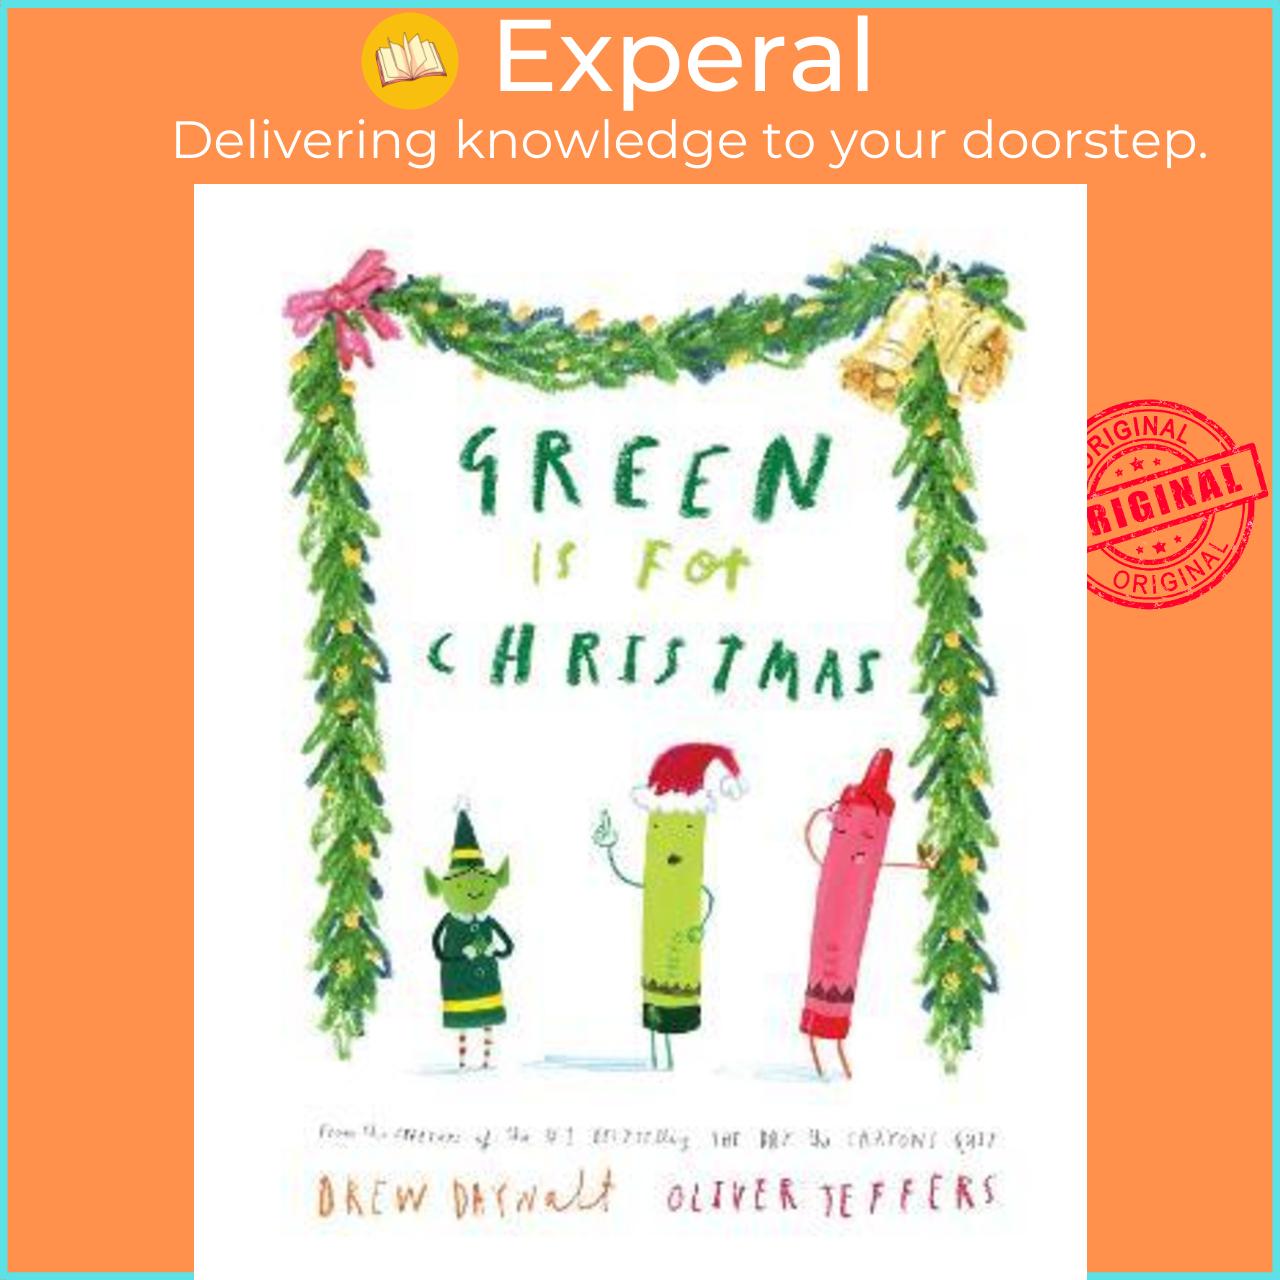 Sách - Green is for Christmas by Drew Daywalt (UK edition, hardcover)